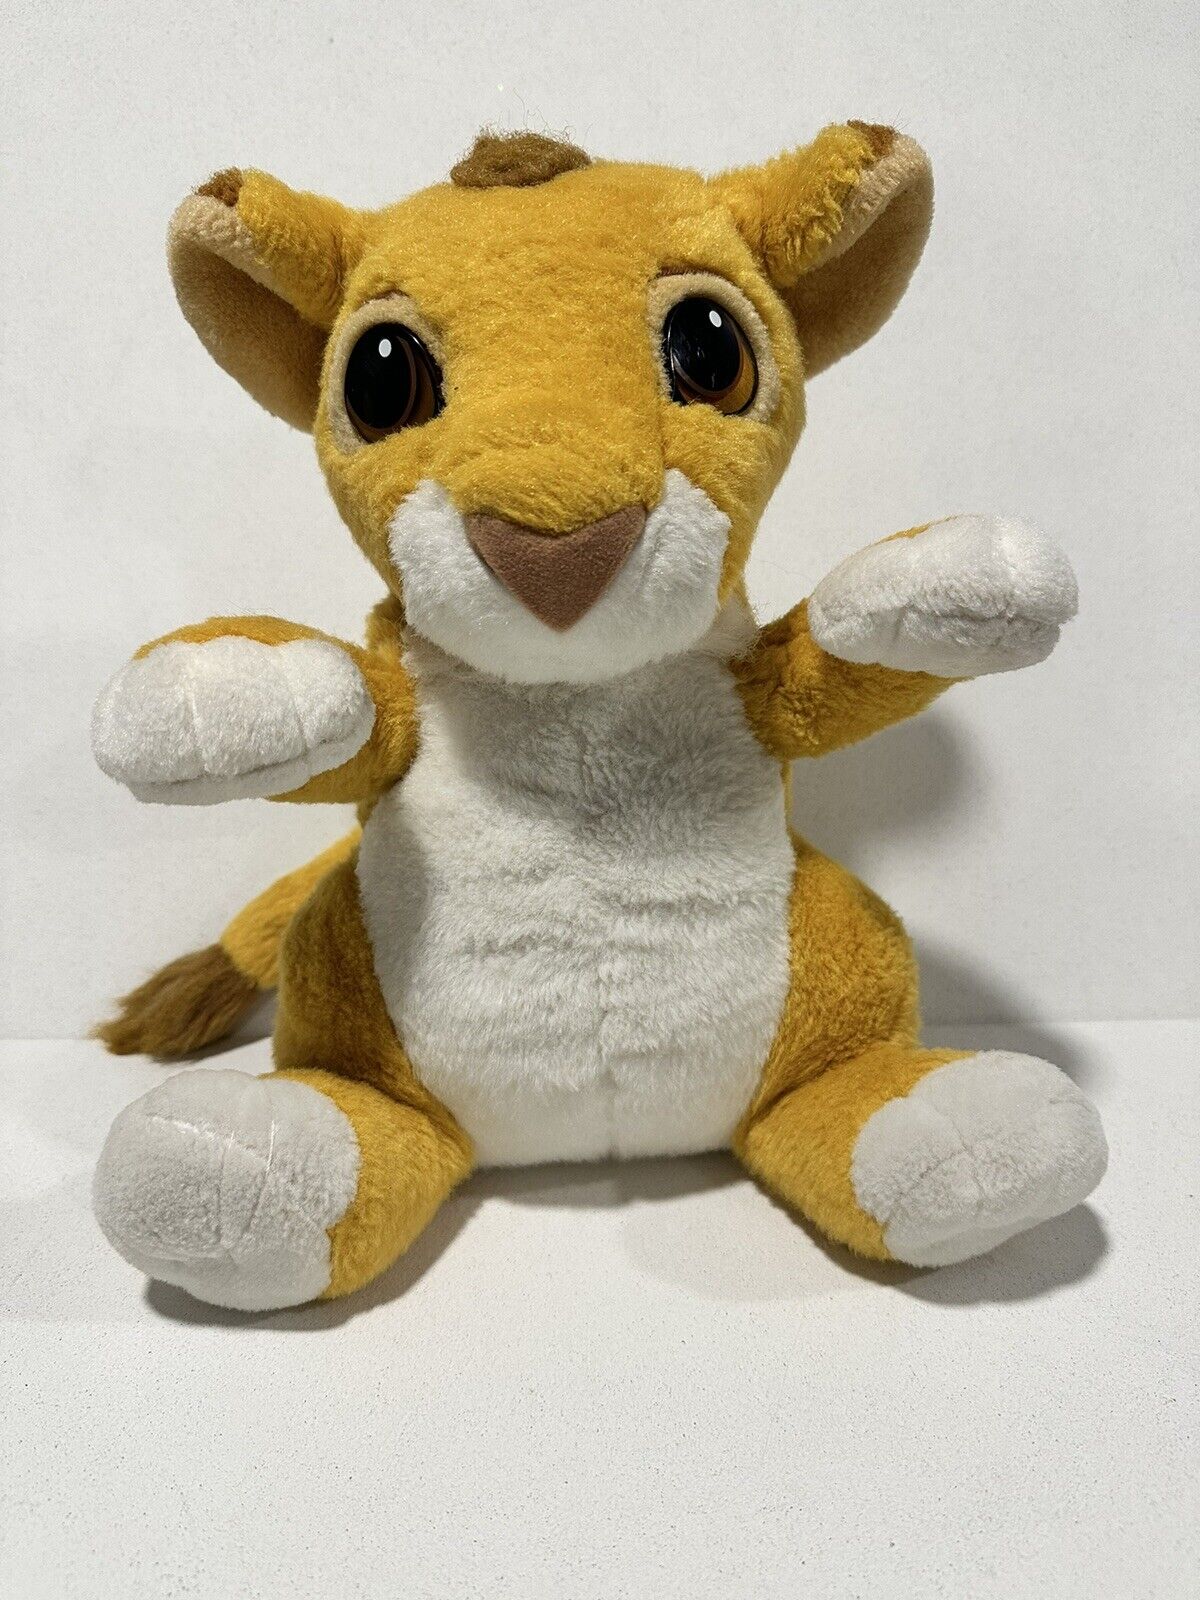 Walt Disney Authentic The Lion King 1993 Baby Simba Plush Toy TESTED WORKS 🦁